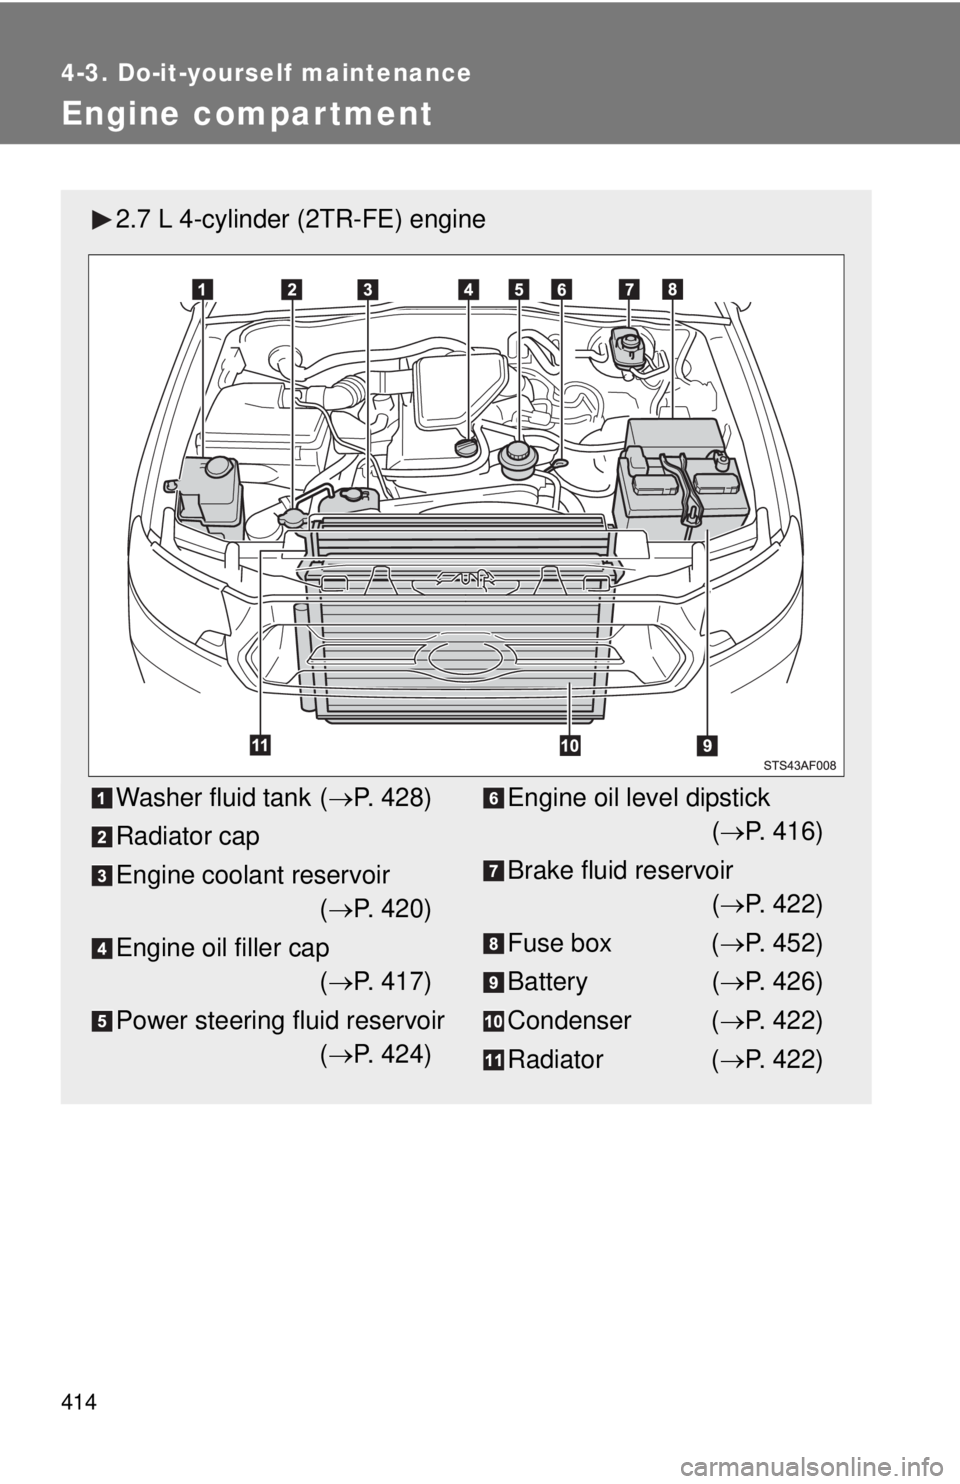 TOYOTA TACOMA 2014  Owners Manual (in English) 414
4-3. Do-it-yourself maintenance
Engine compar tment
2.7 L 4-cylinder (2TR-FE) engine
Washer fluid tank (P. 428)
Radiator cap
Engine coolant reservoir ( P. 420)
Engine oil filler cap ( P. 